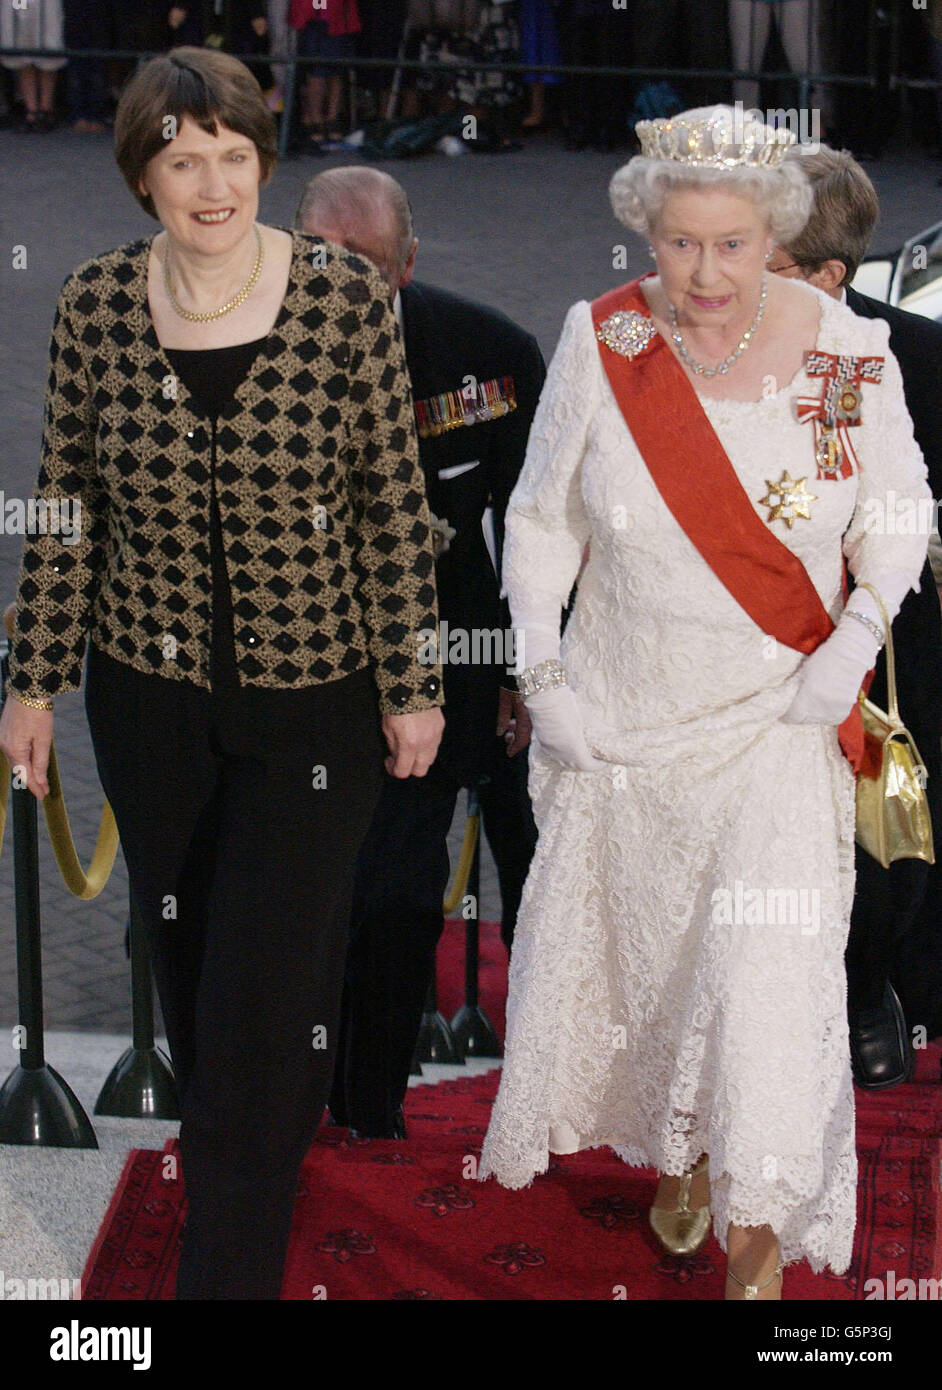 Britain's Queen Elizabeth II (right) and New Zealand Prime Minister Helen Clark arrive at Parliament House, Wellington, New Zealand for a State Dinner during a visit to the country during a visit to the country. * In a keynote speech at the dinner, the Queen said it had been a privilege and a pleasure to serve as the country's head of state for the past 50 years and said she looked foreword to continuing to serve to the best of her ability in the years to come. Stock Photo